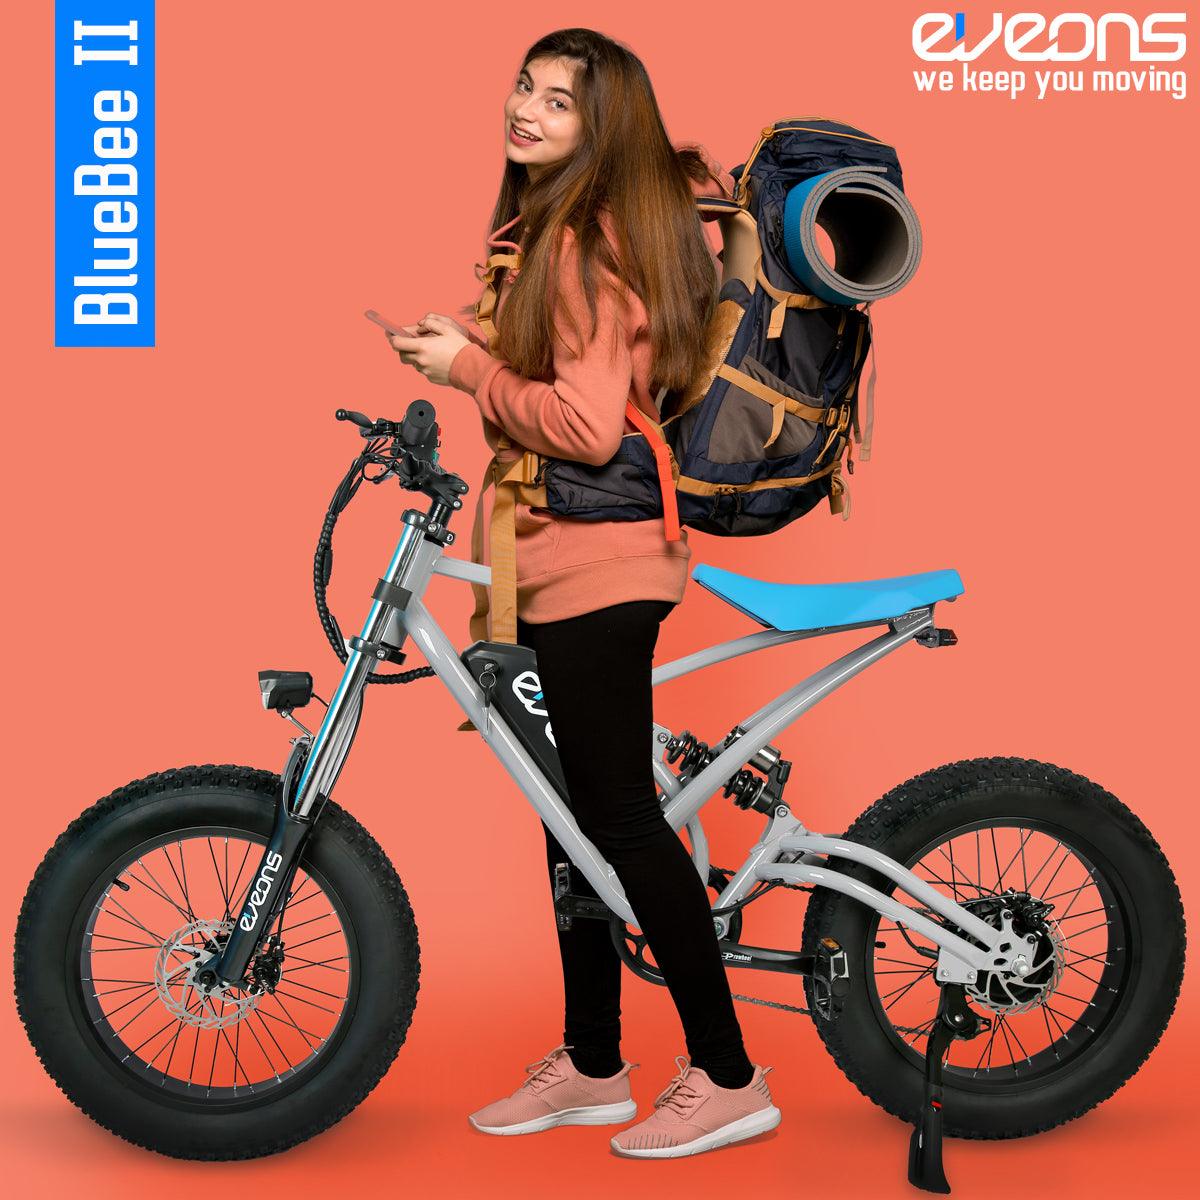 10 Reasons Why you should buy our E-Bike Bluebee II - Eveons Mobility Systems